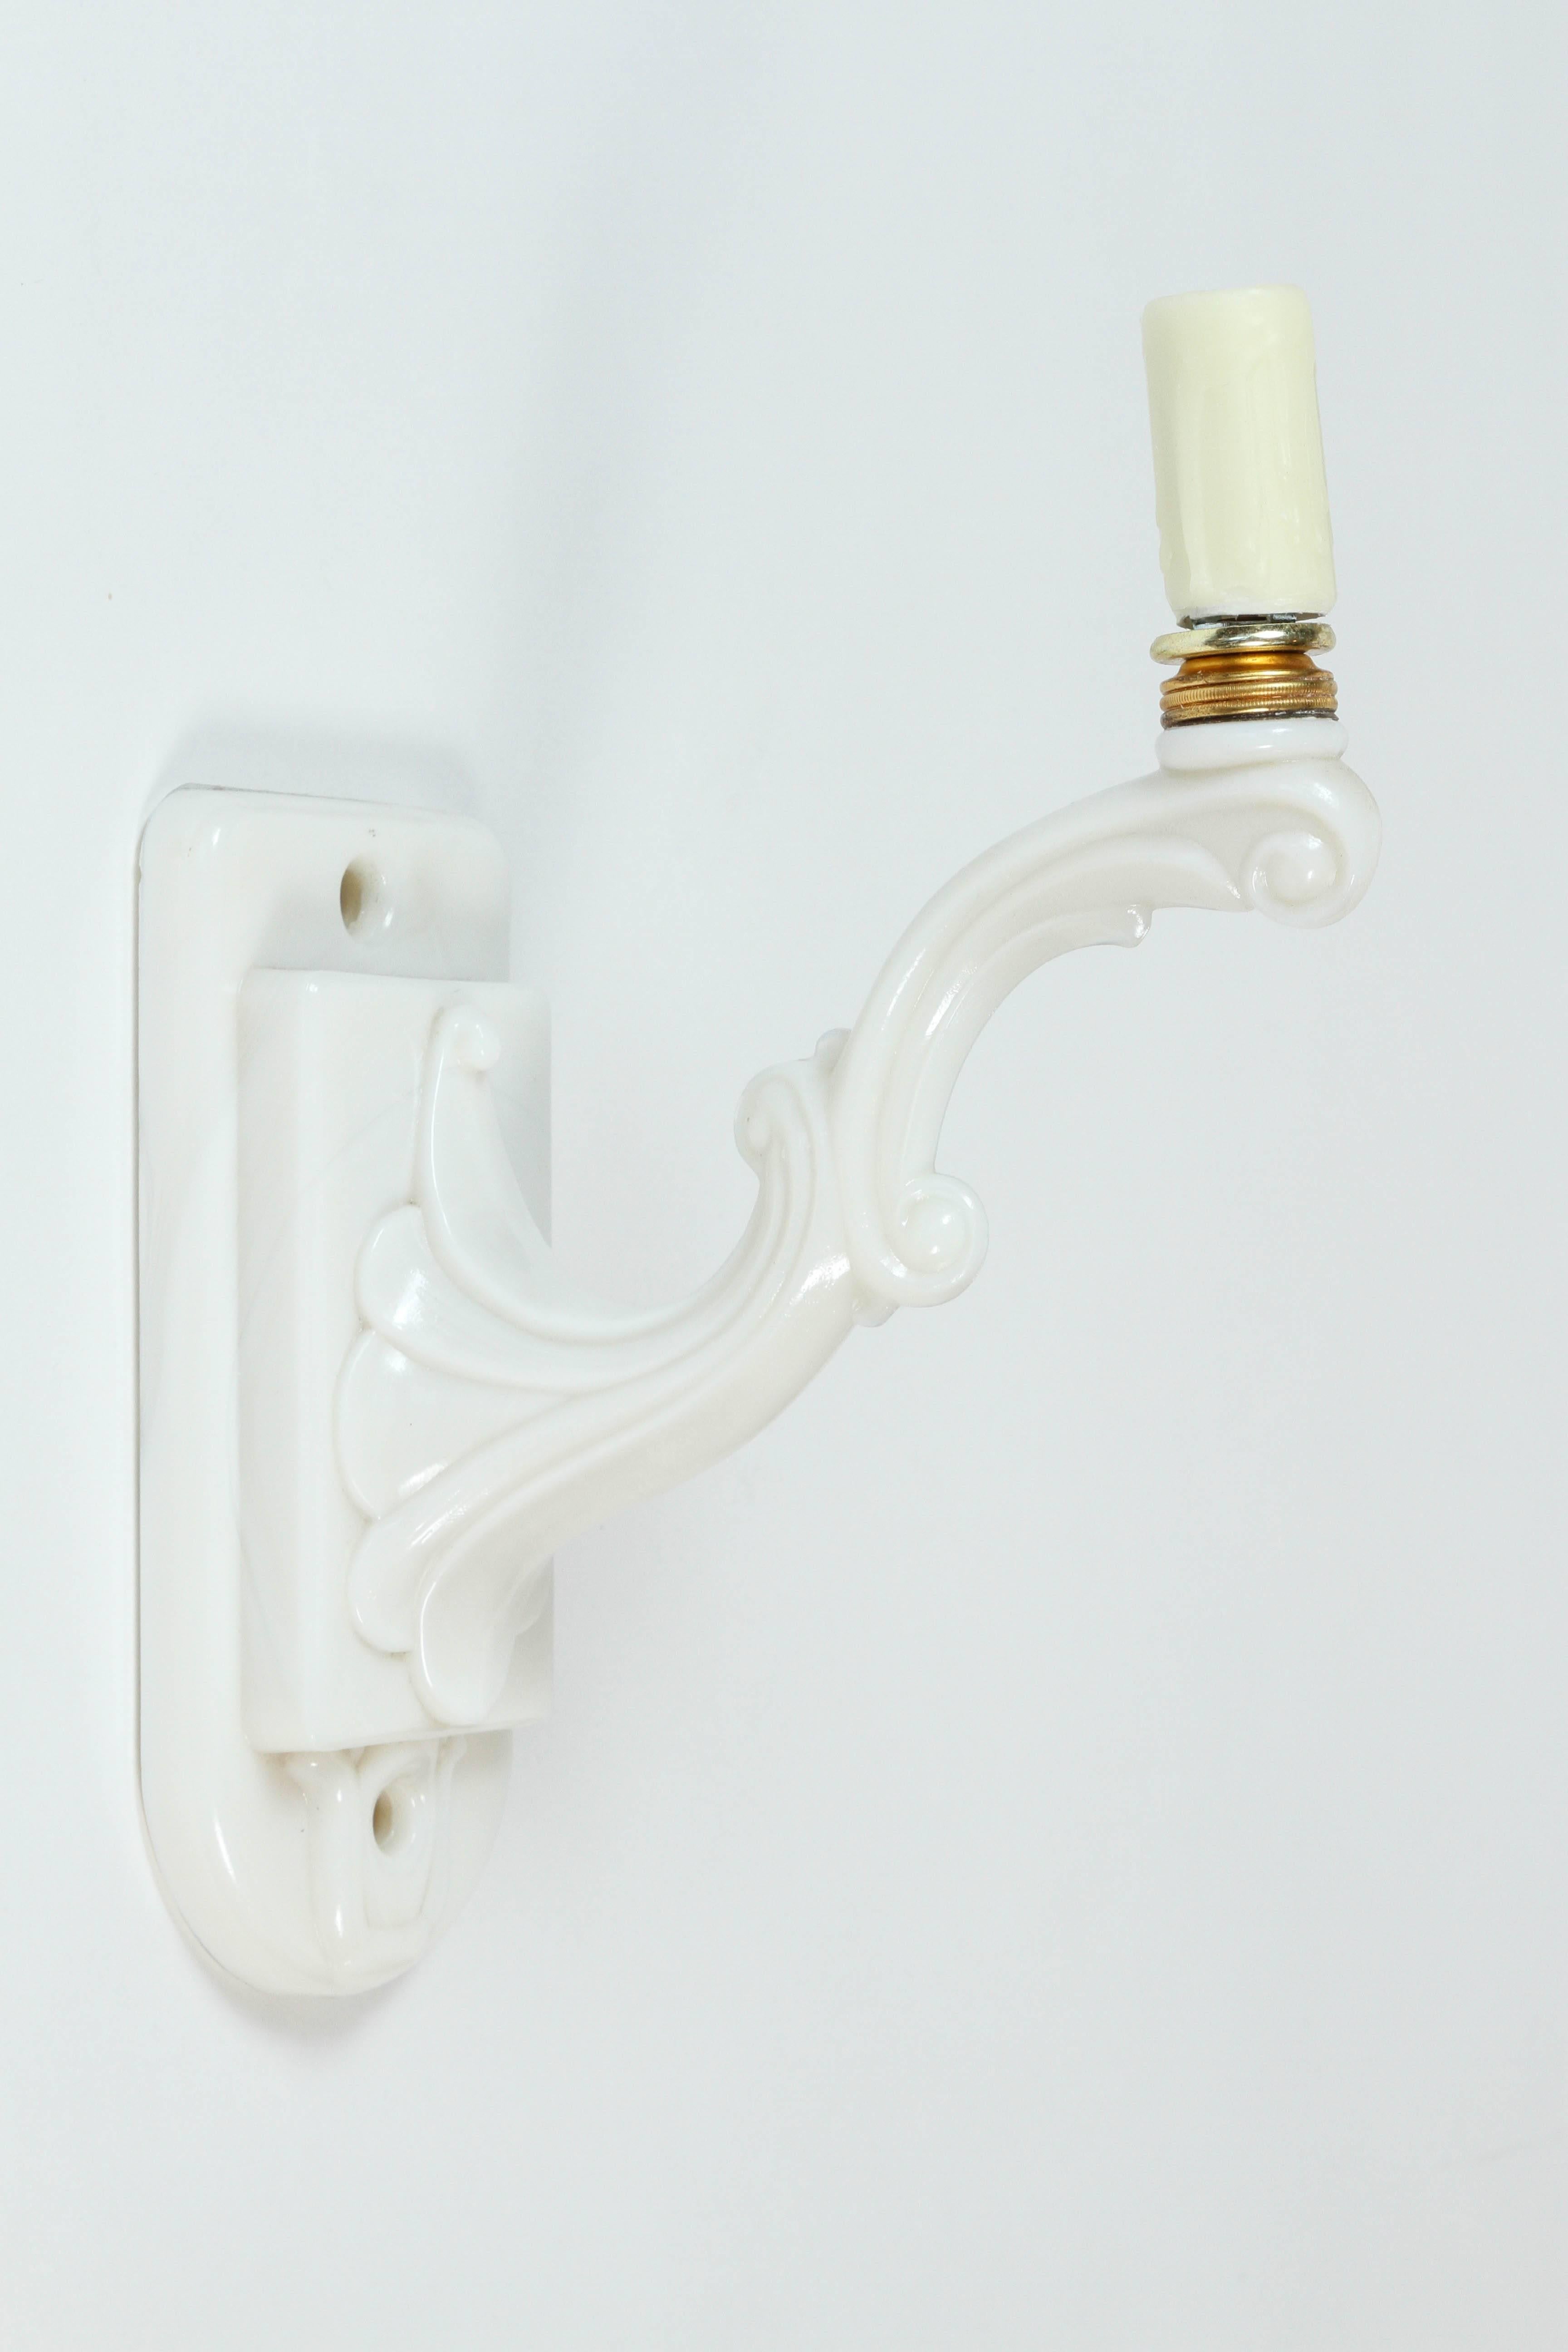 Vintage milk glass single light sconce with all new wiring and wax candle sleeve.